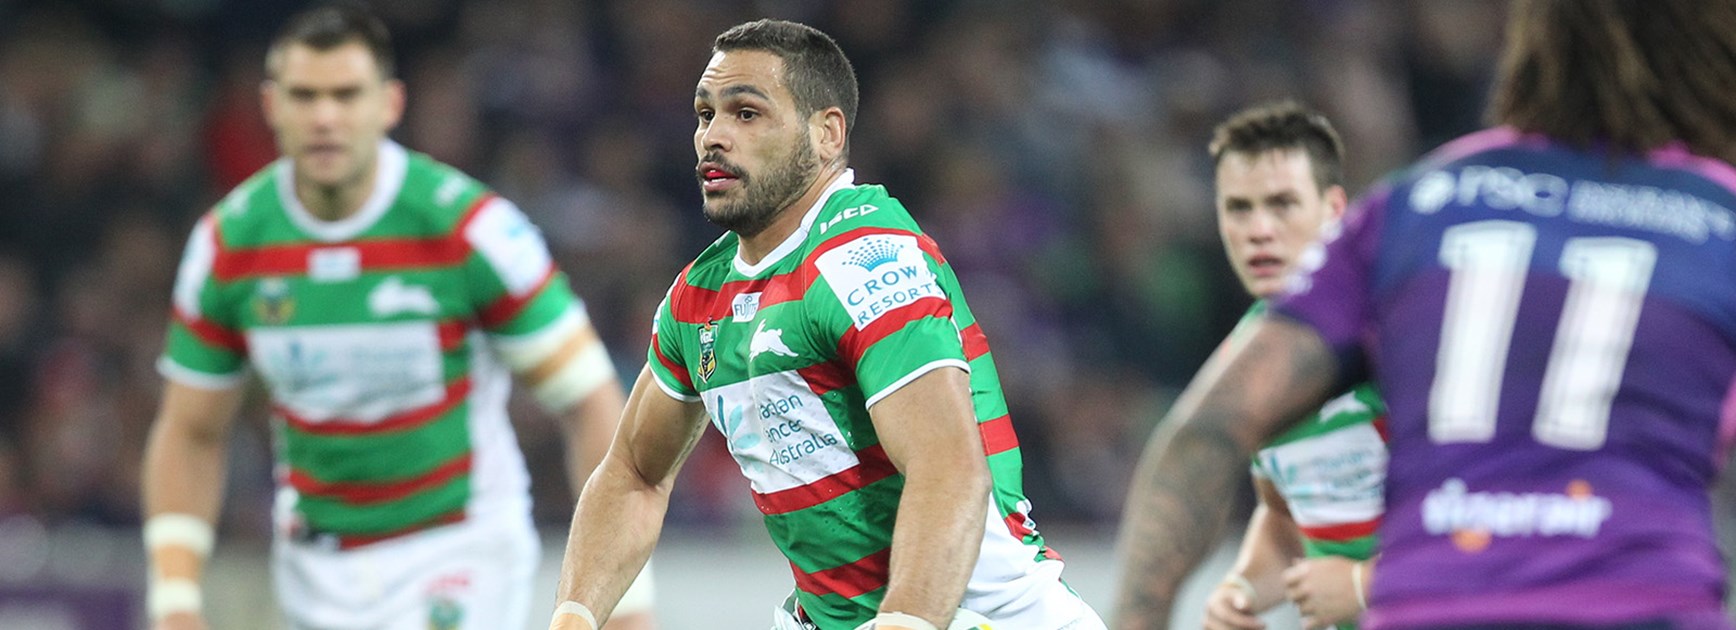 Rabbitohs captain Greg Inglis says his side needs to play for the full 80 minutes, after losing to the Storm in Round 10.